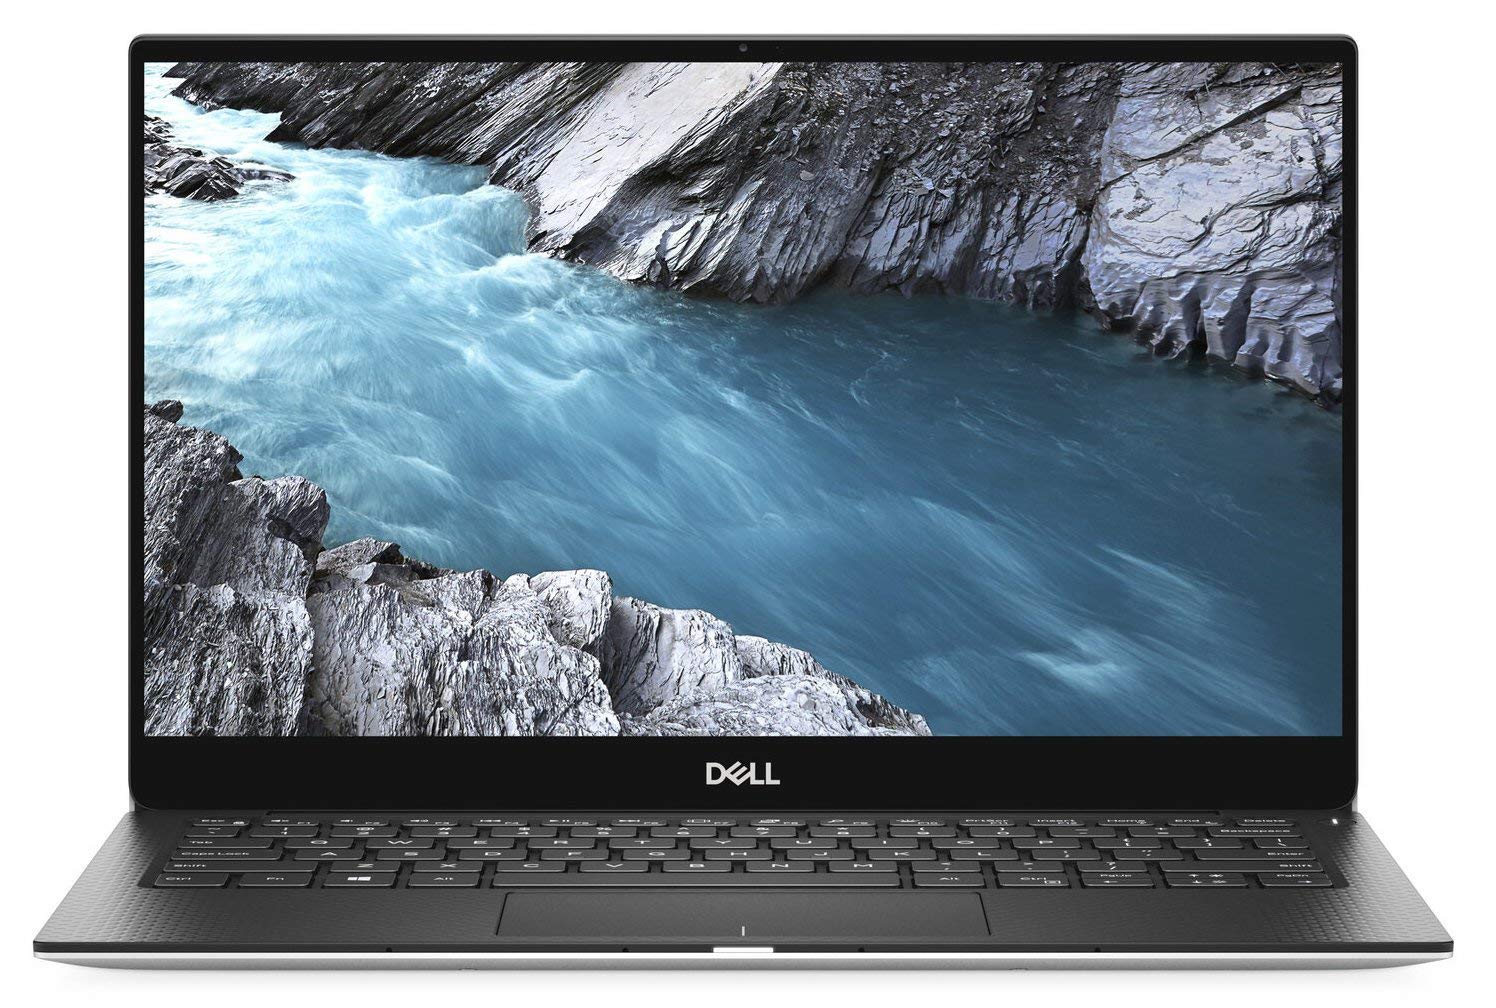 How to take a screenshot on Dell XPS 15